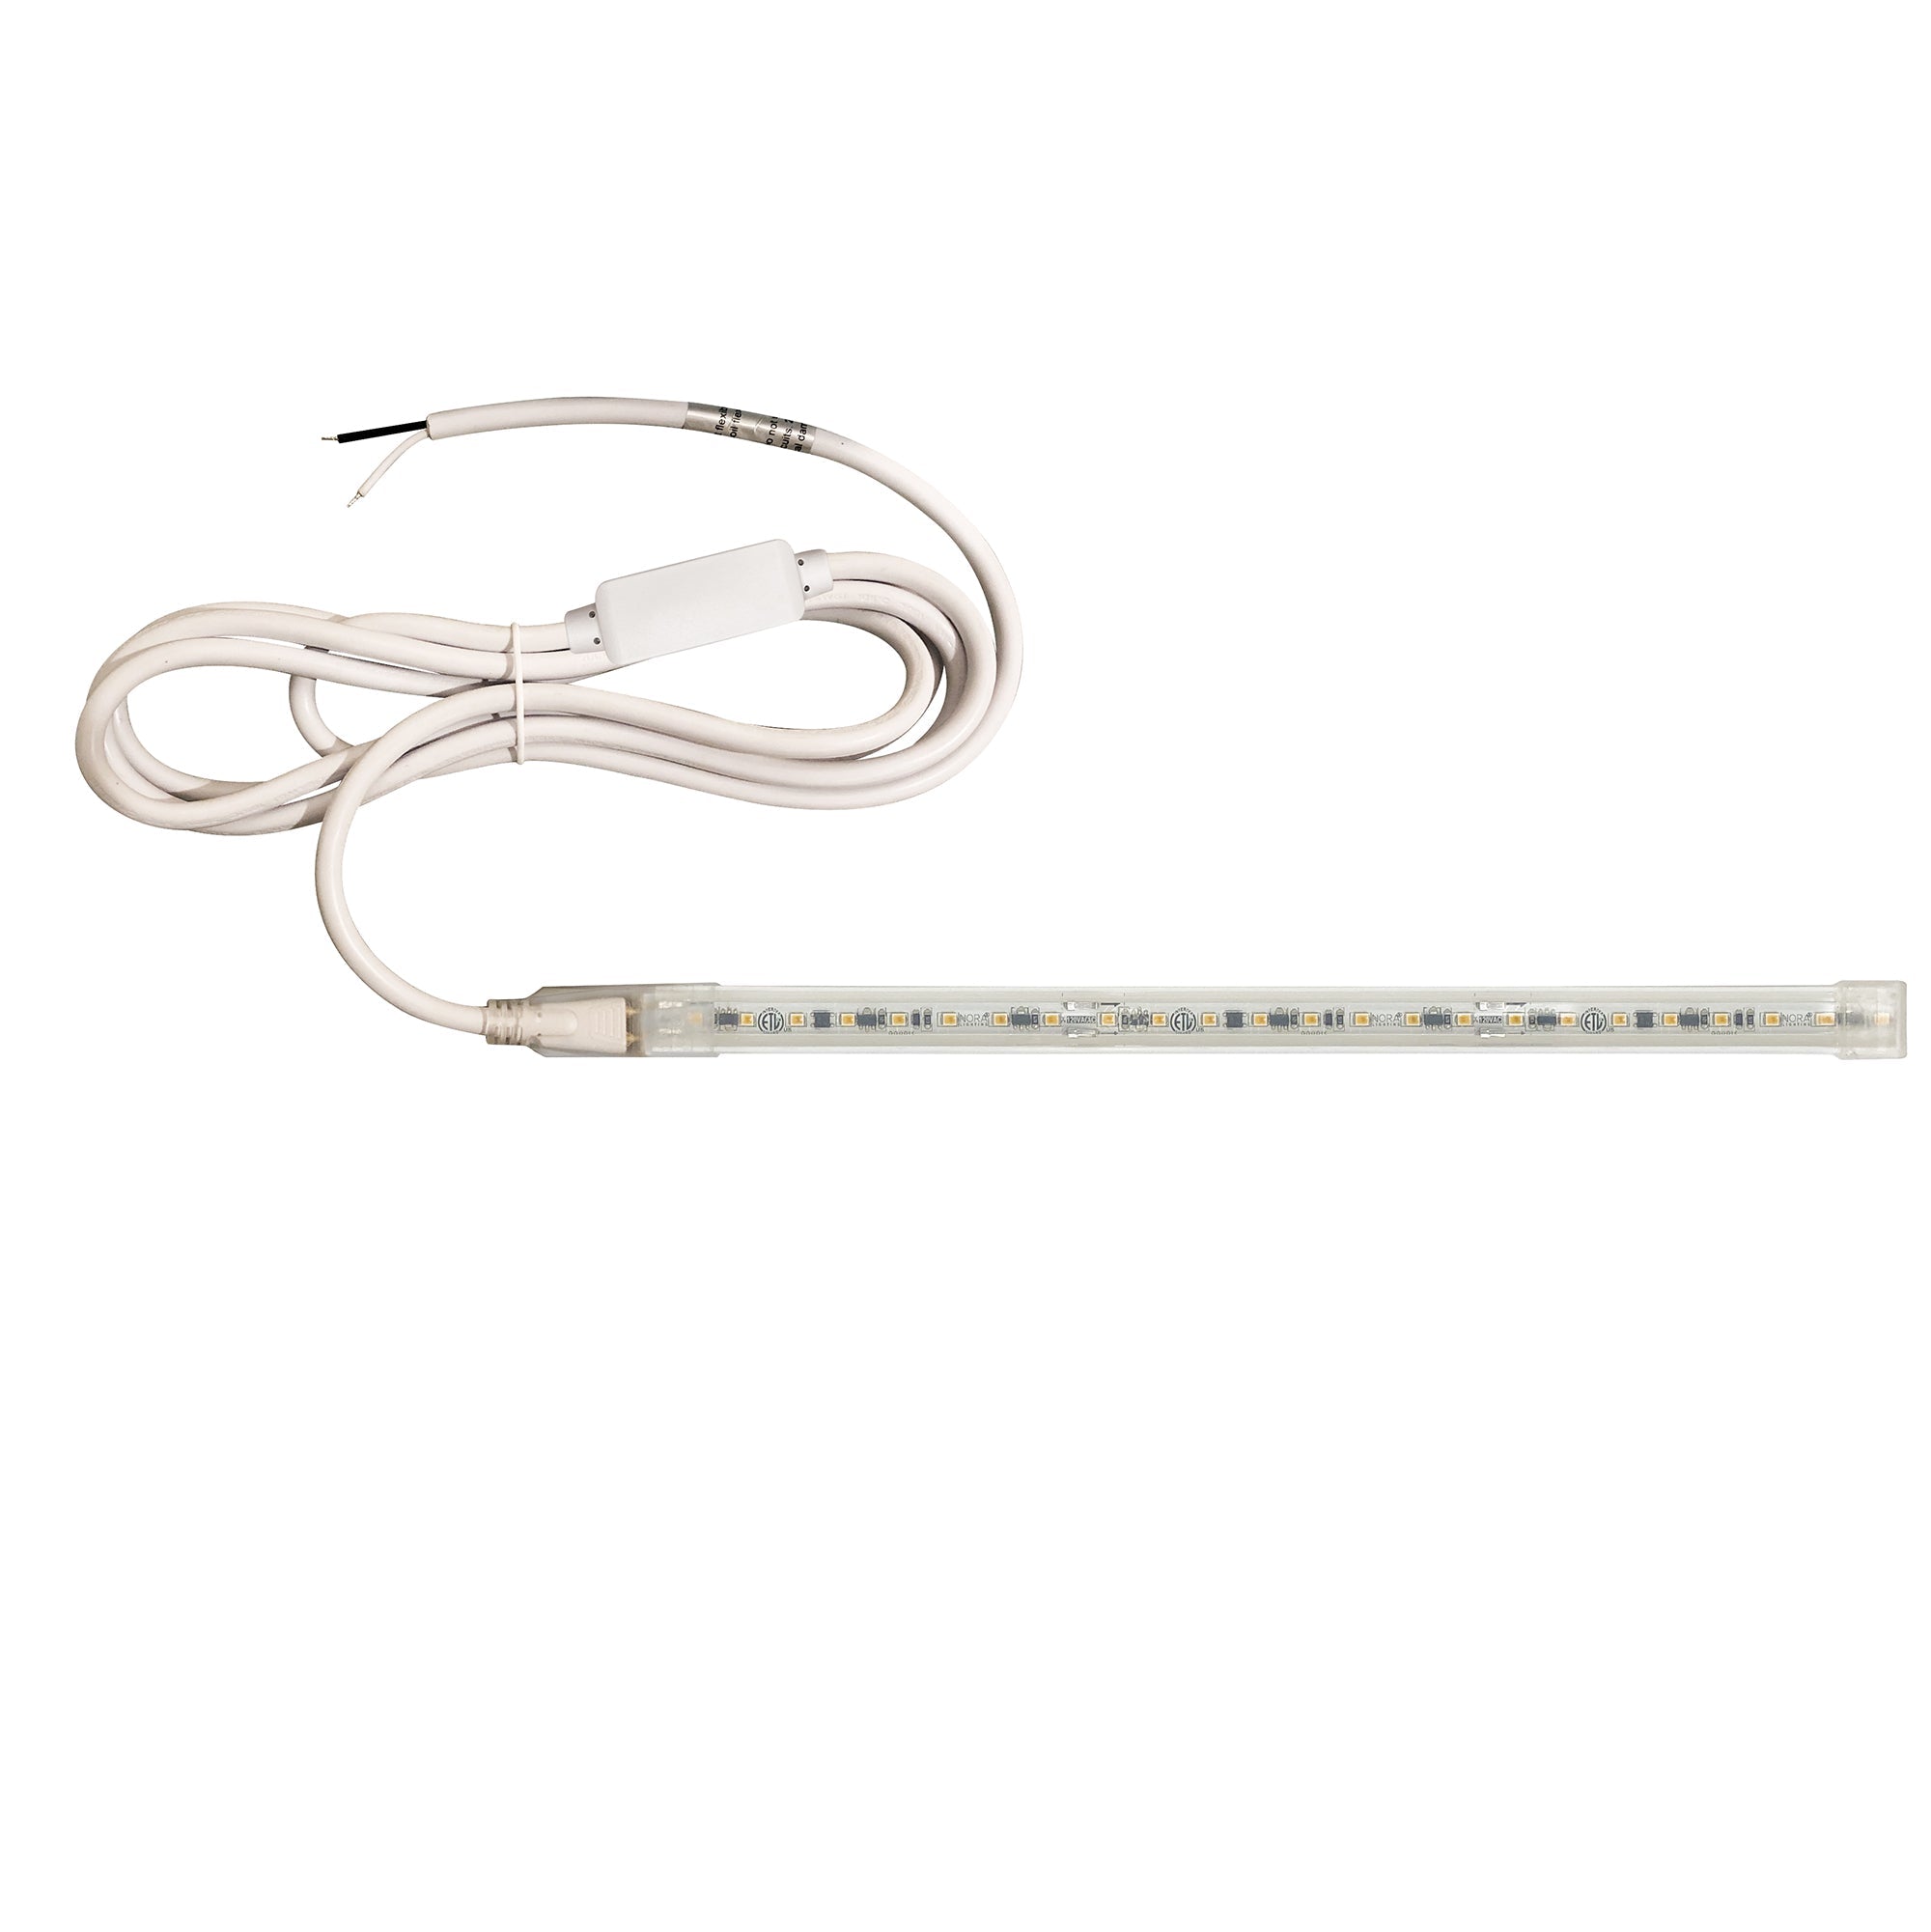 Nora Lighting NUTP13-W46-12-930/HWSP - Accent / Undercabinet - Custom Cut 46-ft 120V Continuous LED Tape Light, 330lm / 3.6W per foot, 3000K, w/ Mounting Clips and 8' Hardwired Power Cord w/ Surge Protector